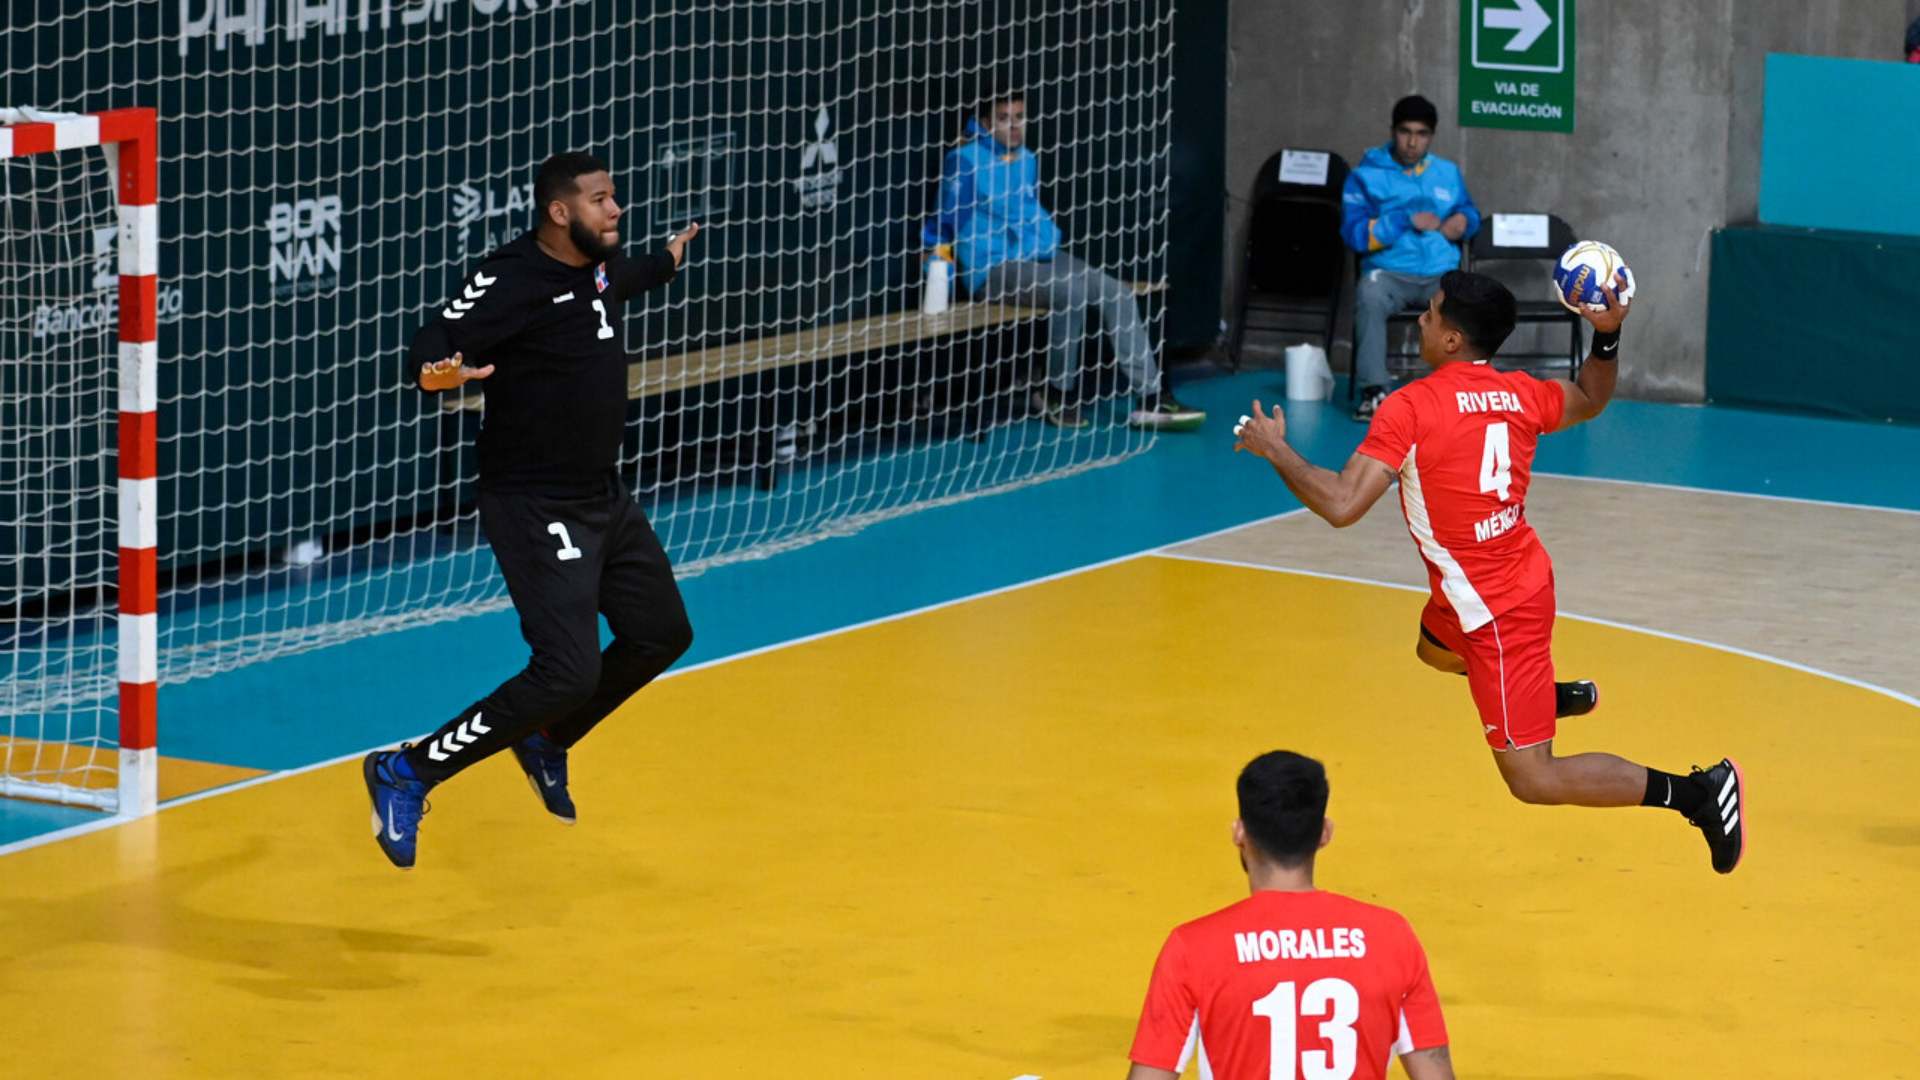 Mexico defeats Dominican Republic, will compete for fifth place in handball